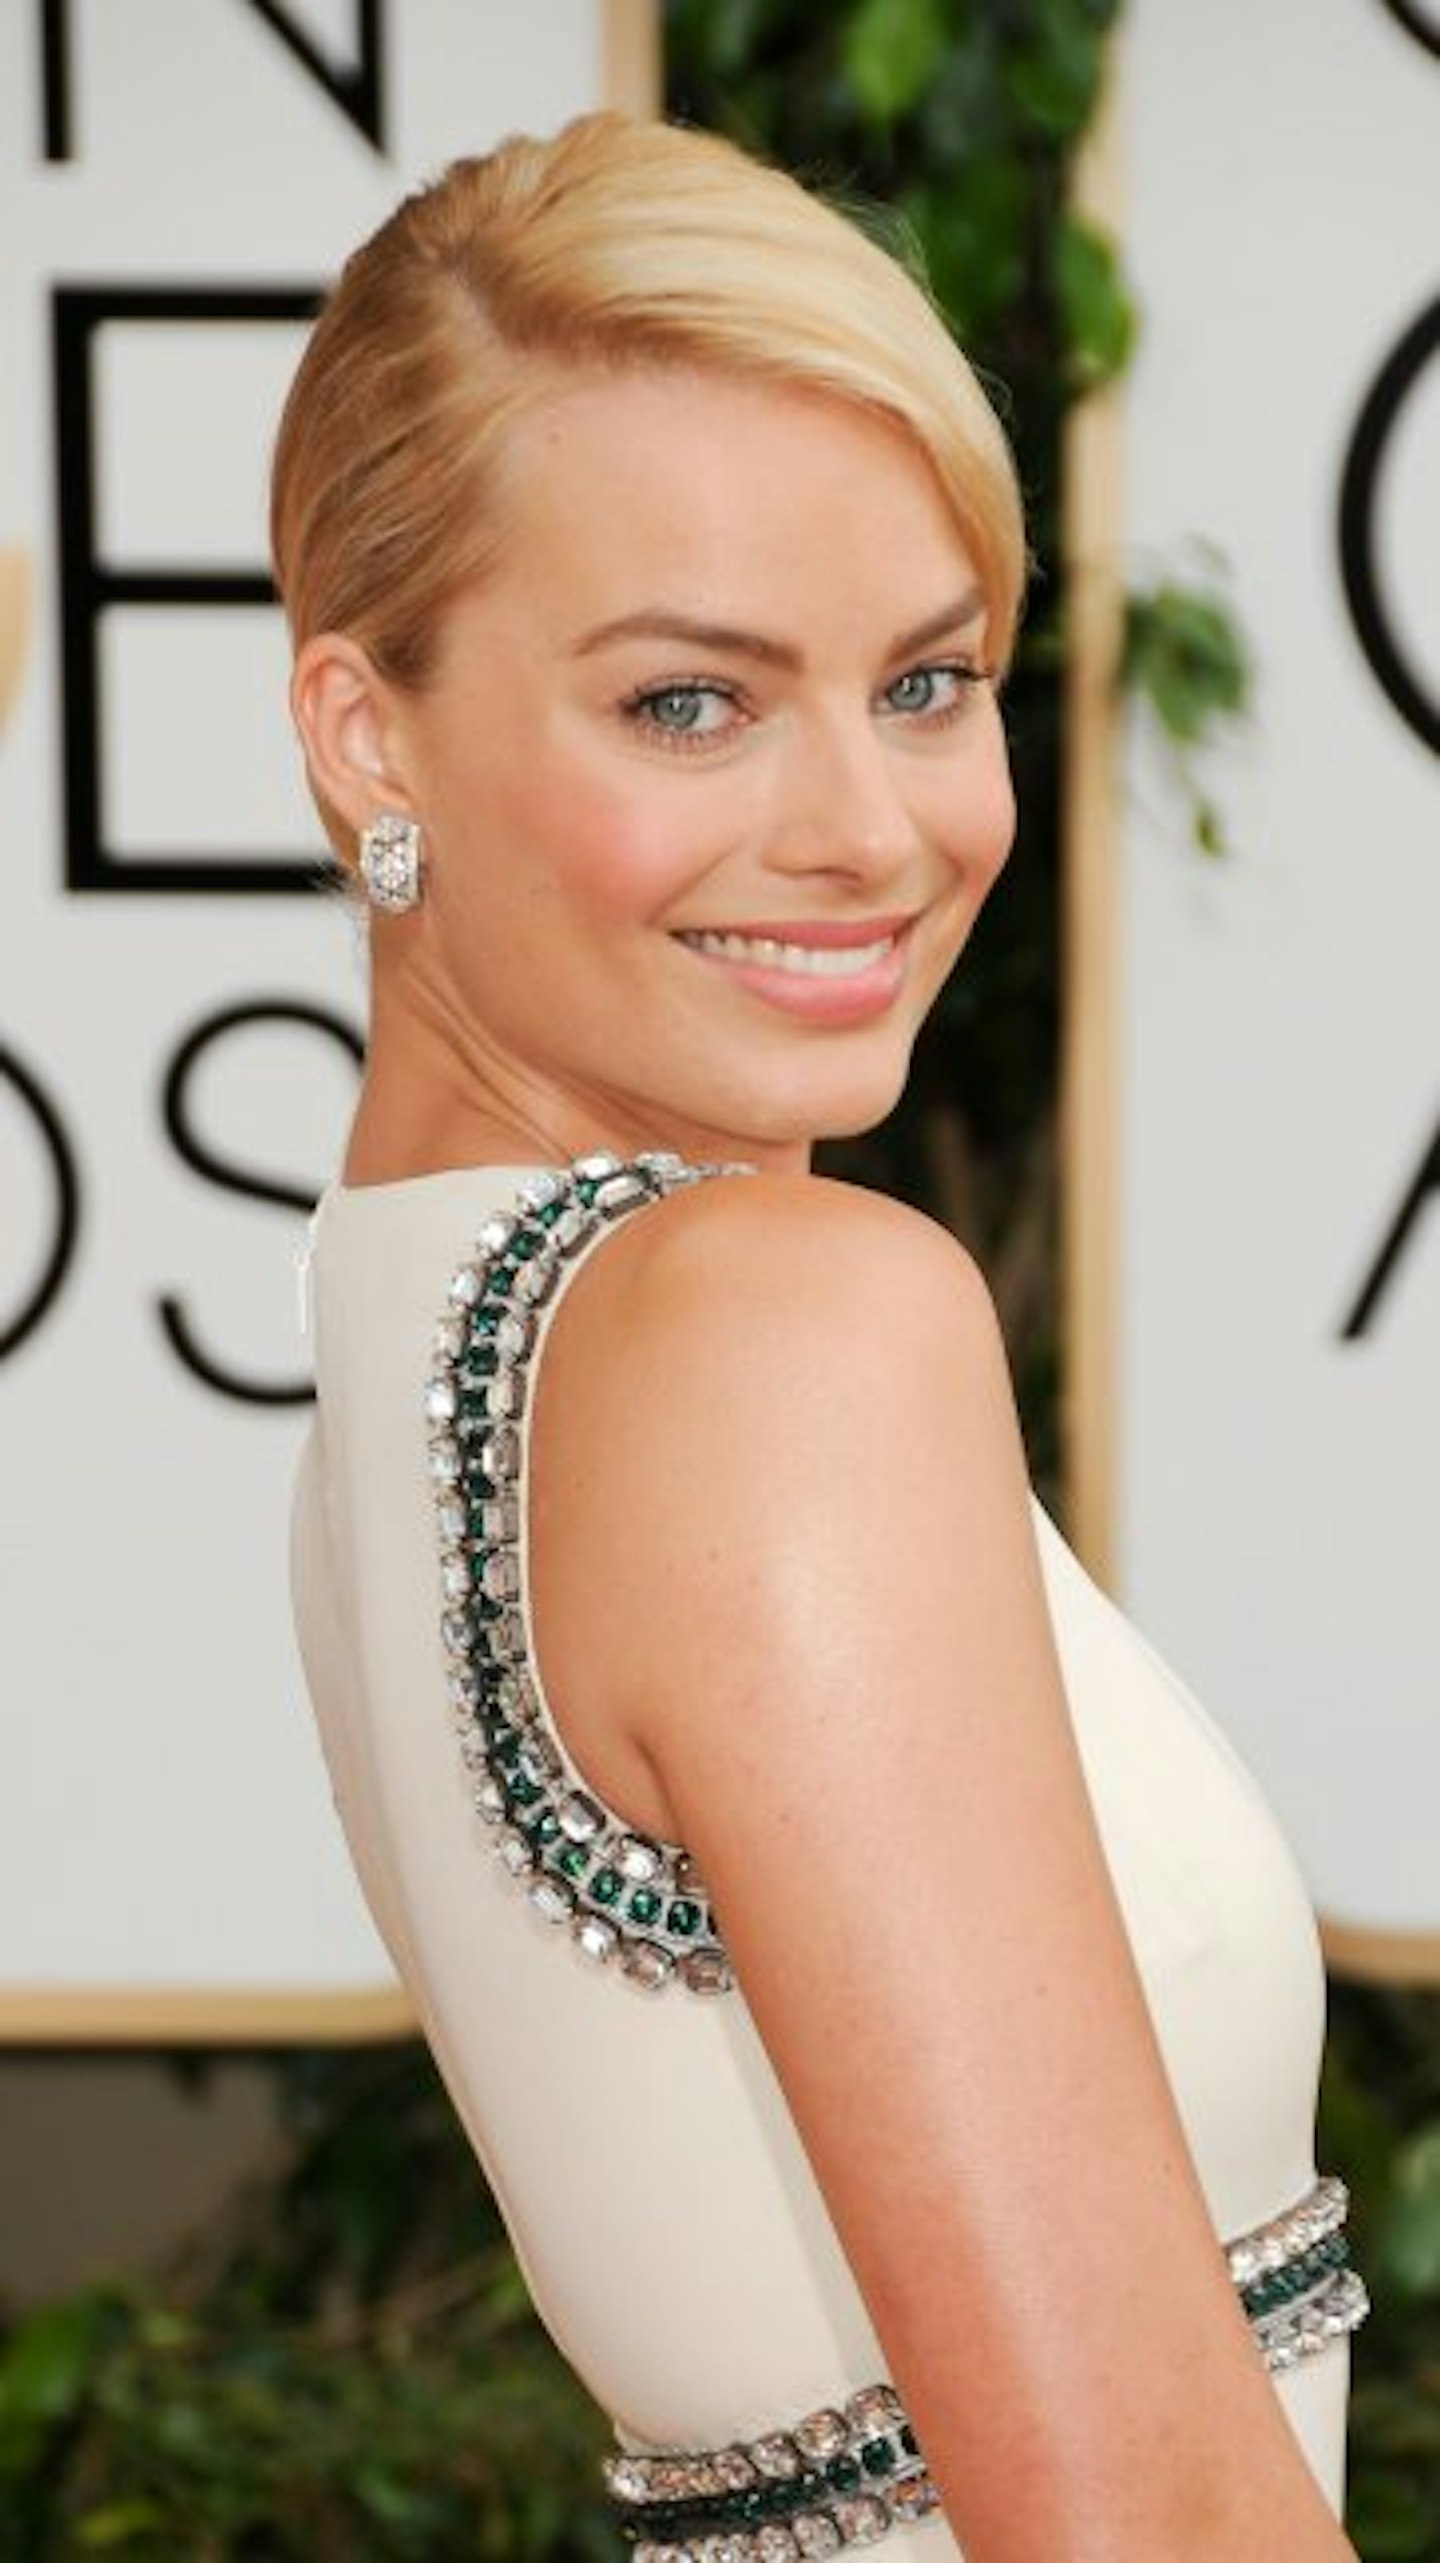 Margot showed of her blonde colour earlier this year at the Golden Globes.